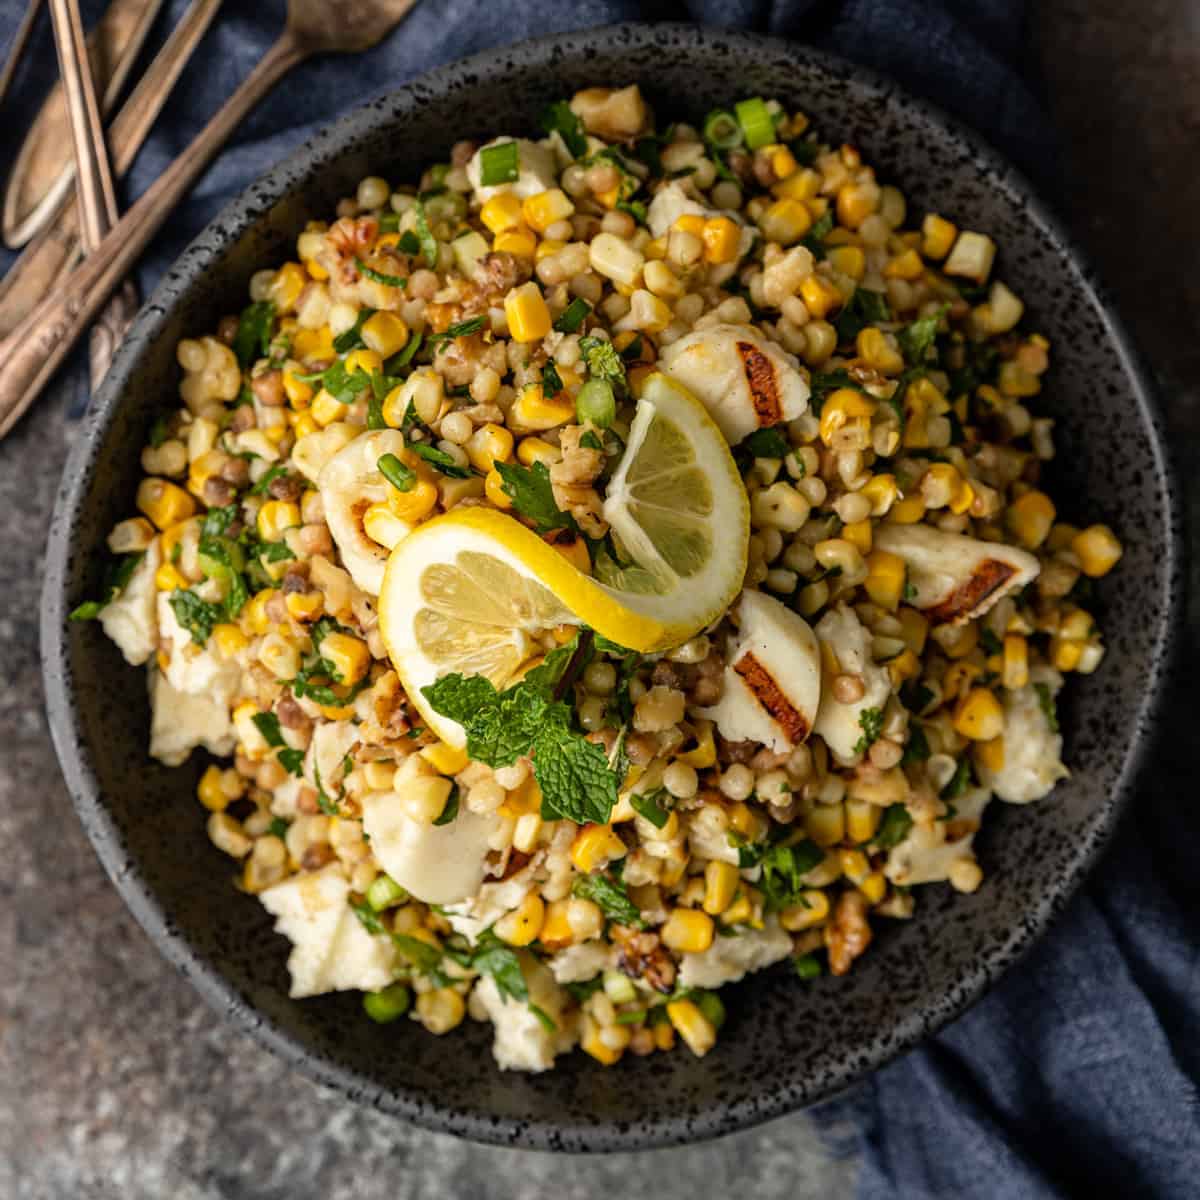 fregola salad with grilled halloumi and corn in large black serving bowl